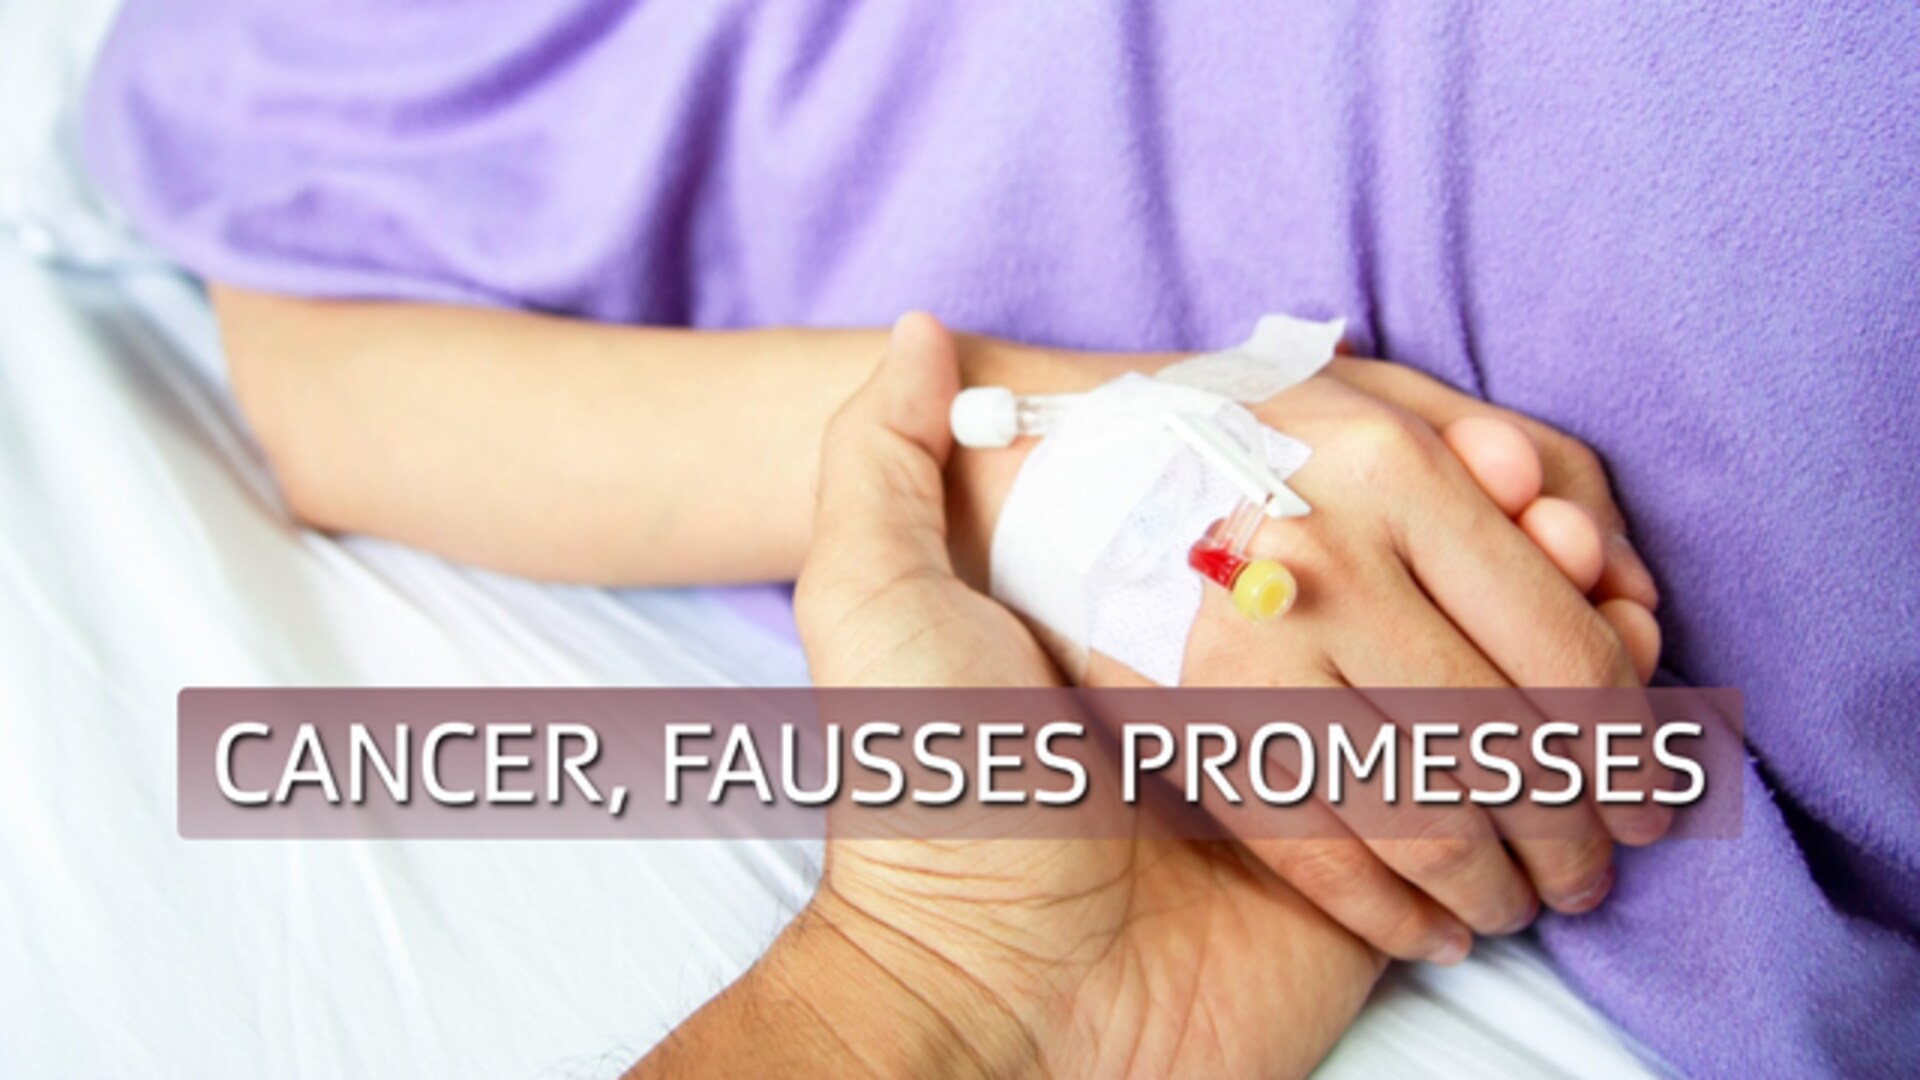 Cancer, fausses promesses